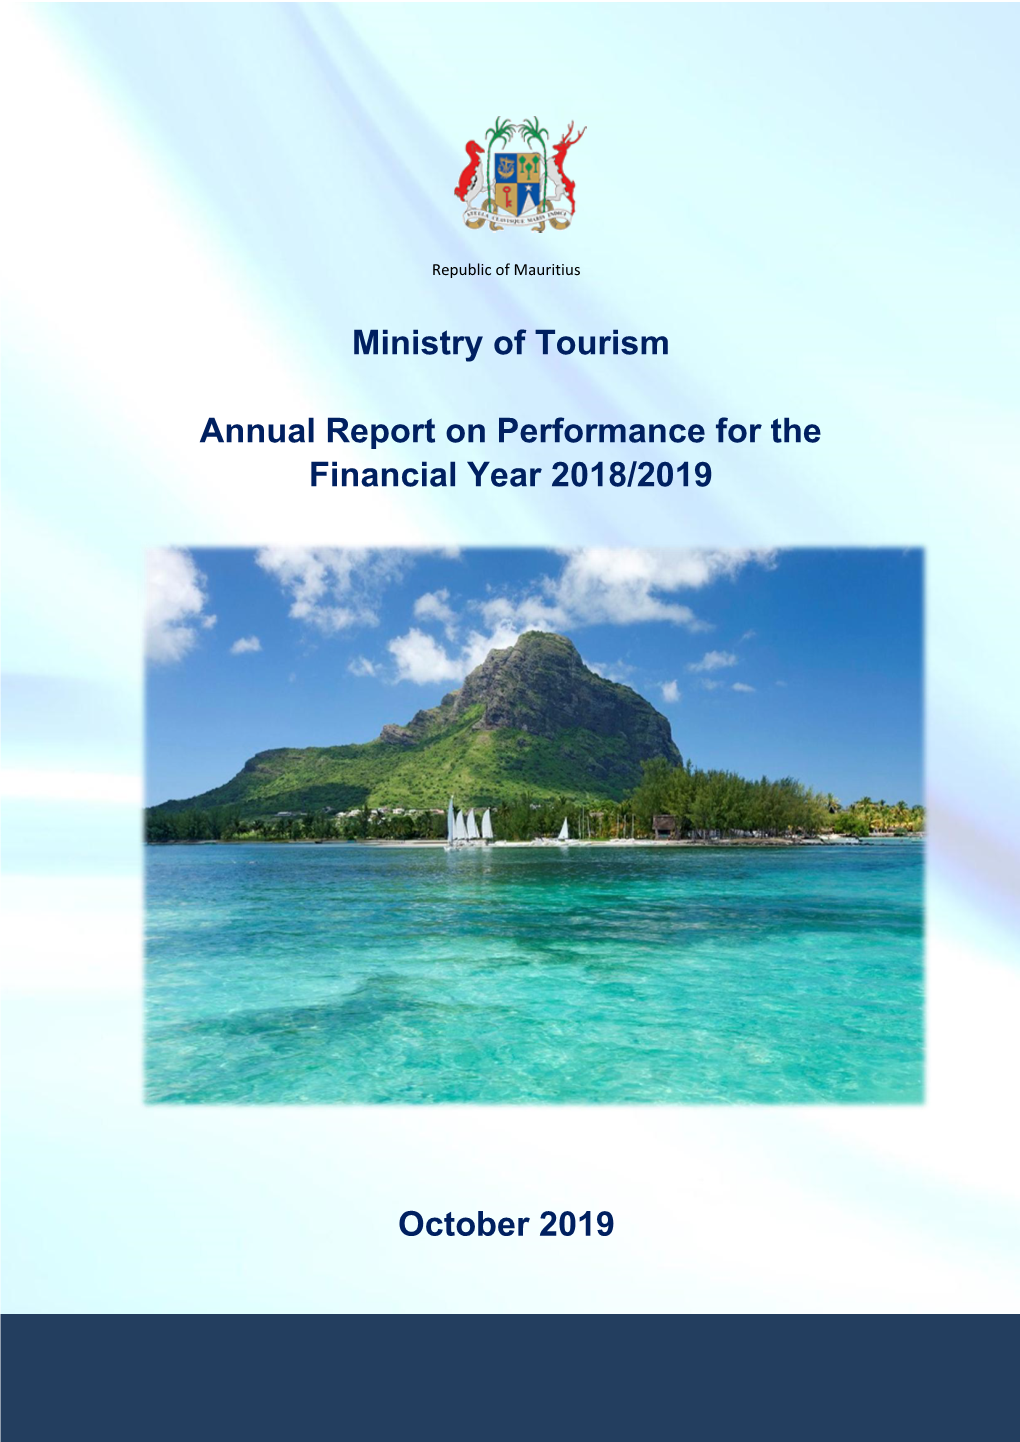 Ministry of Tourism Annual Report on Performance for the Financial Year